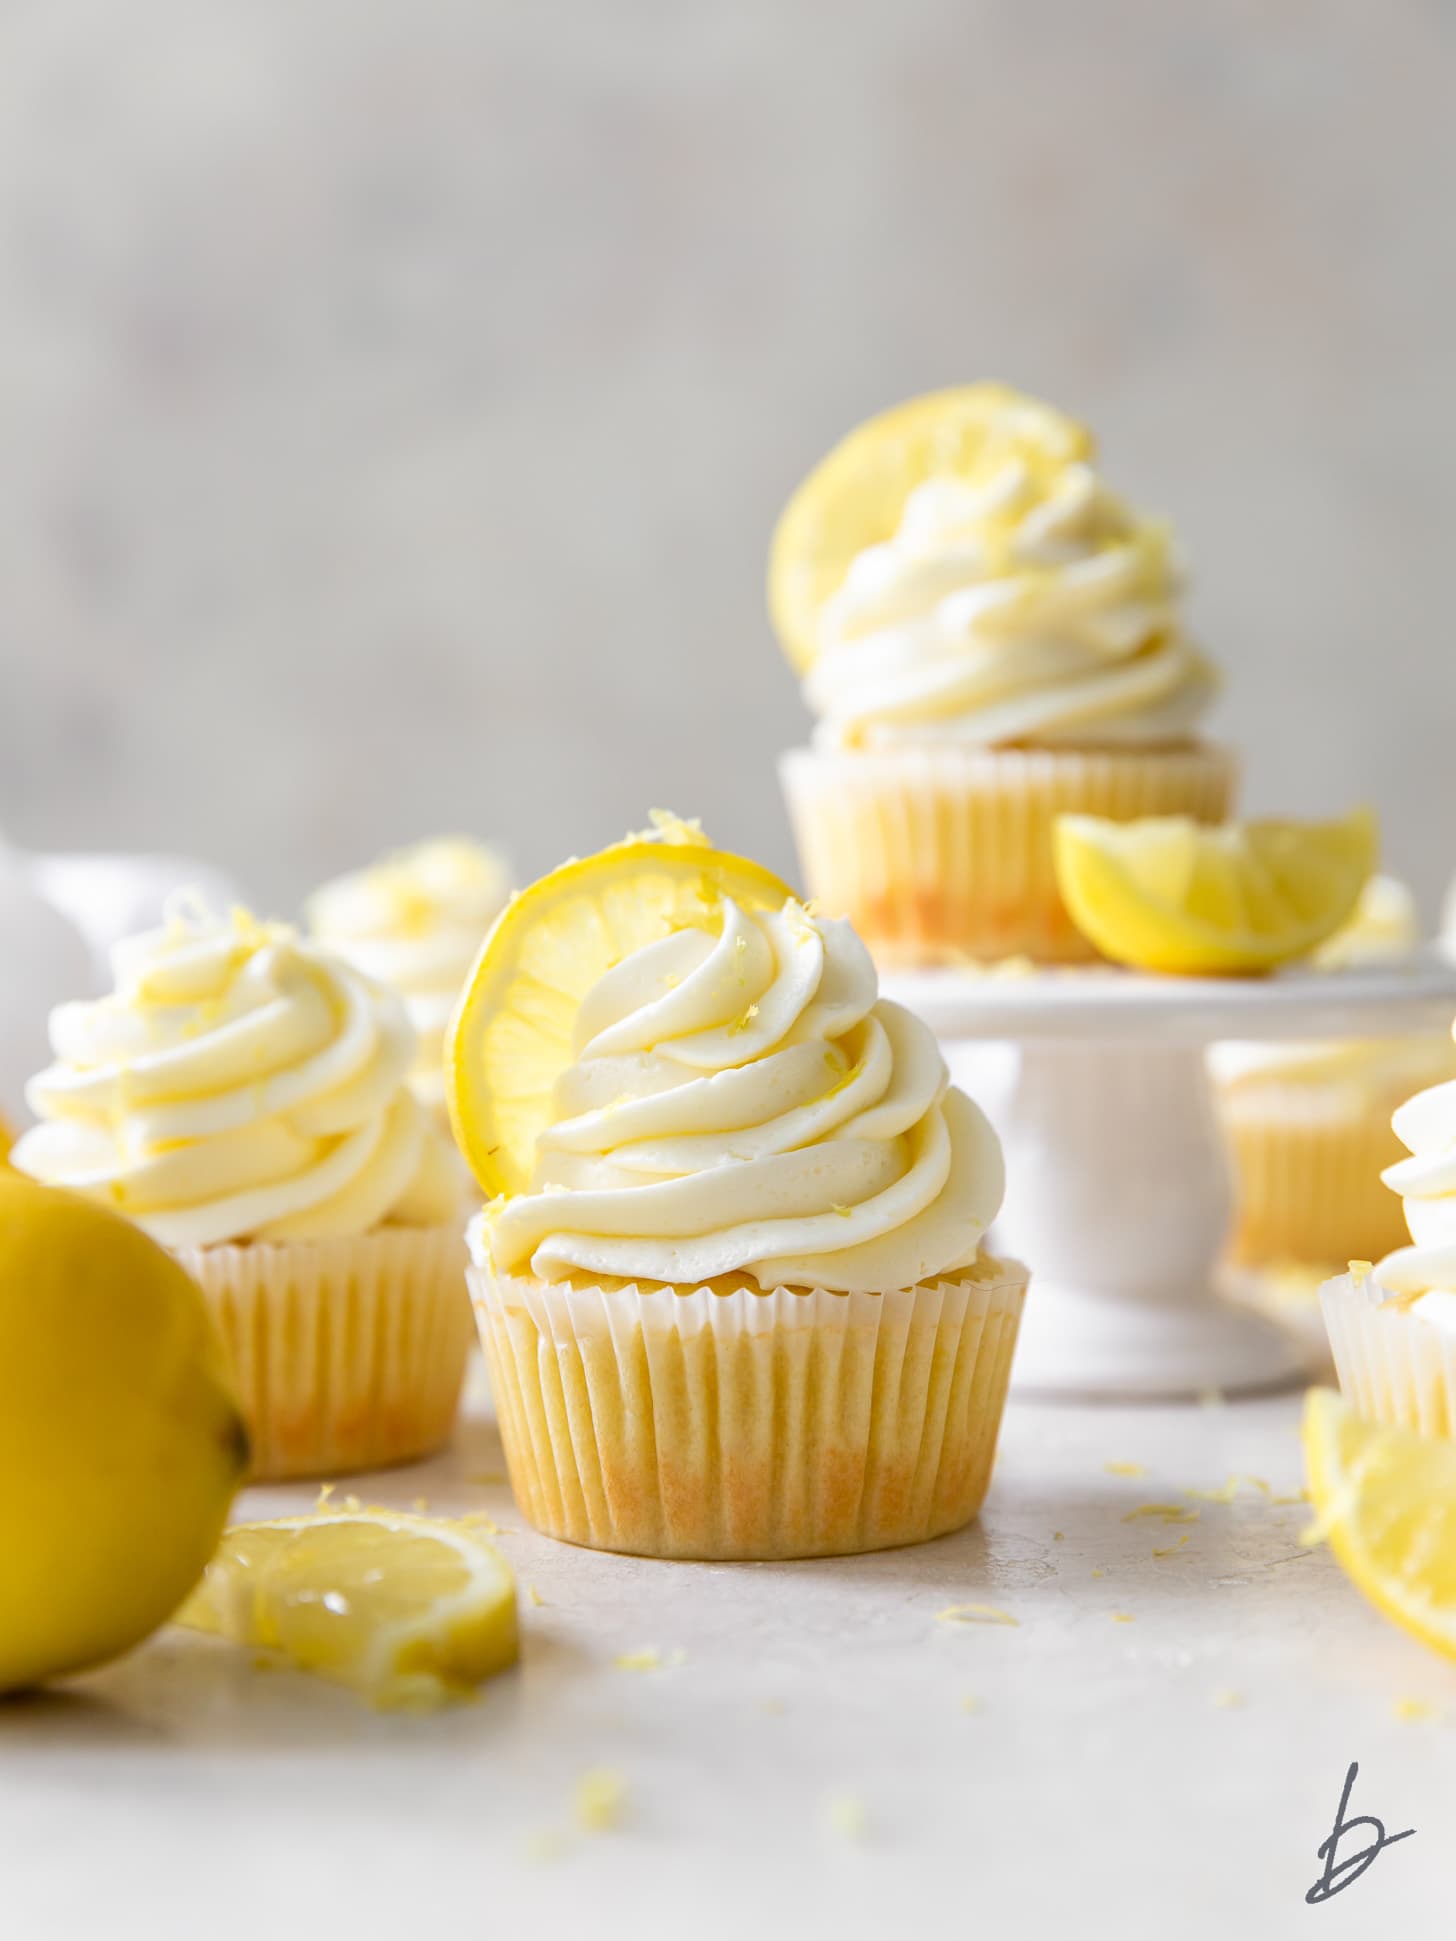 lemon cupcakes with frosting and lemon wedges as garnish.